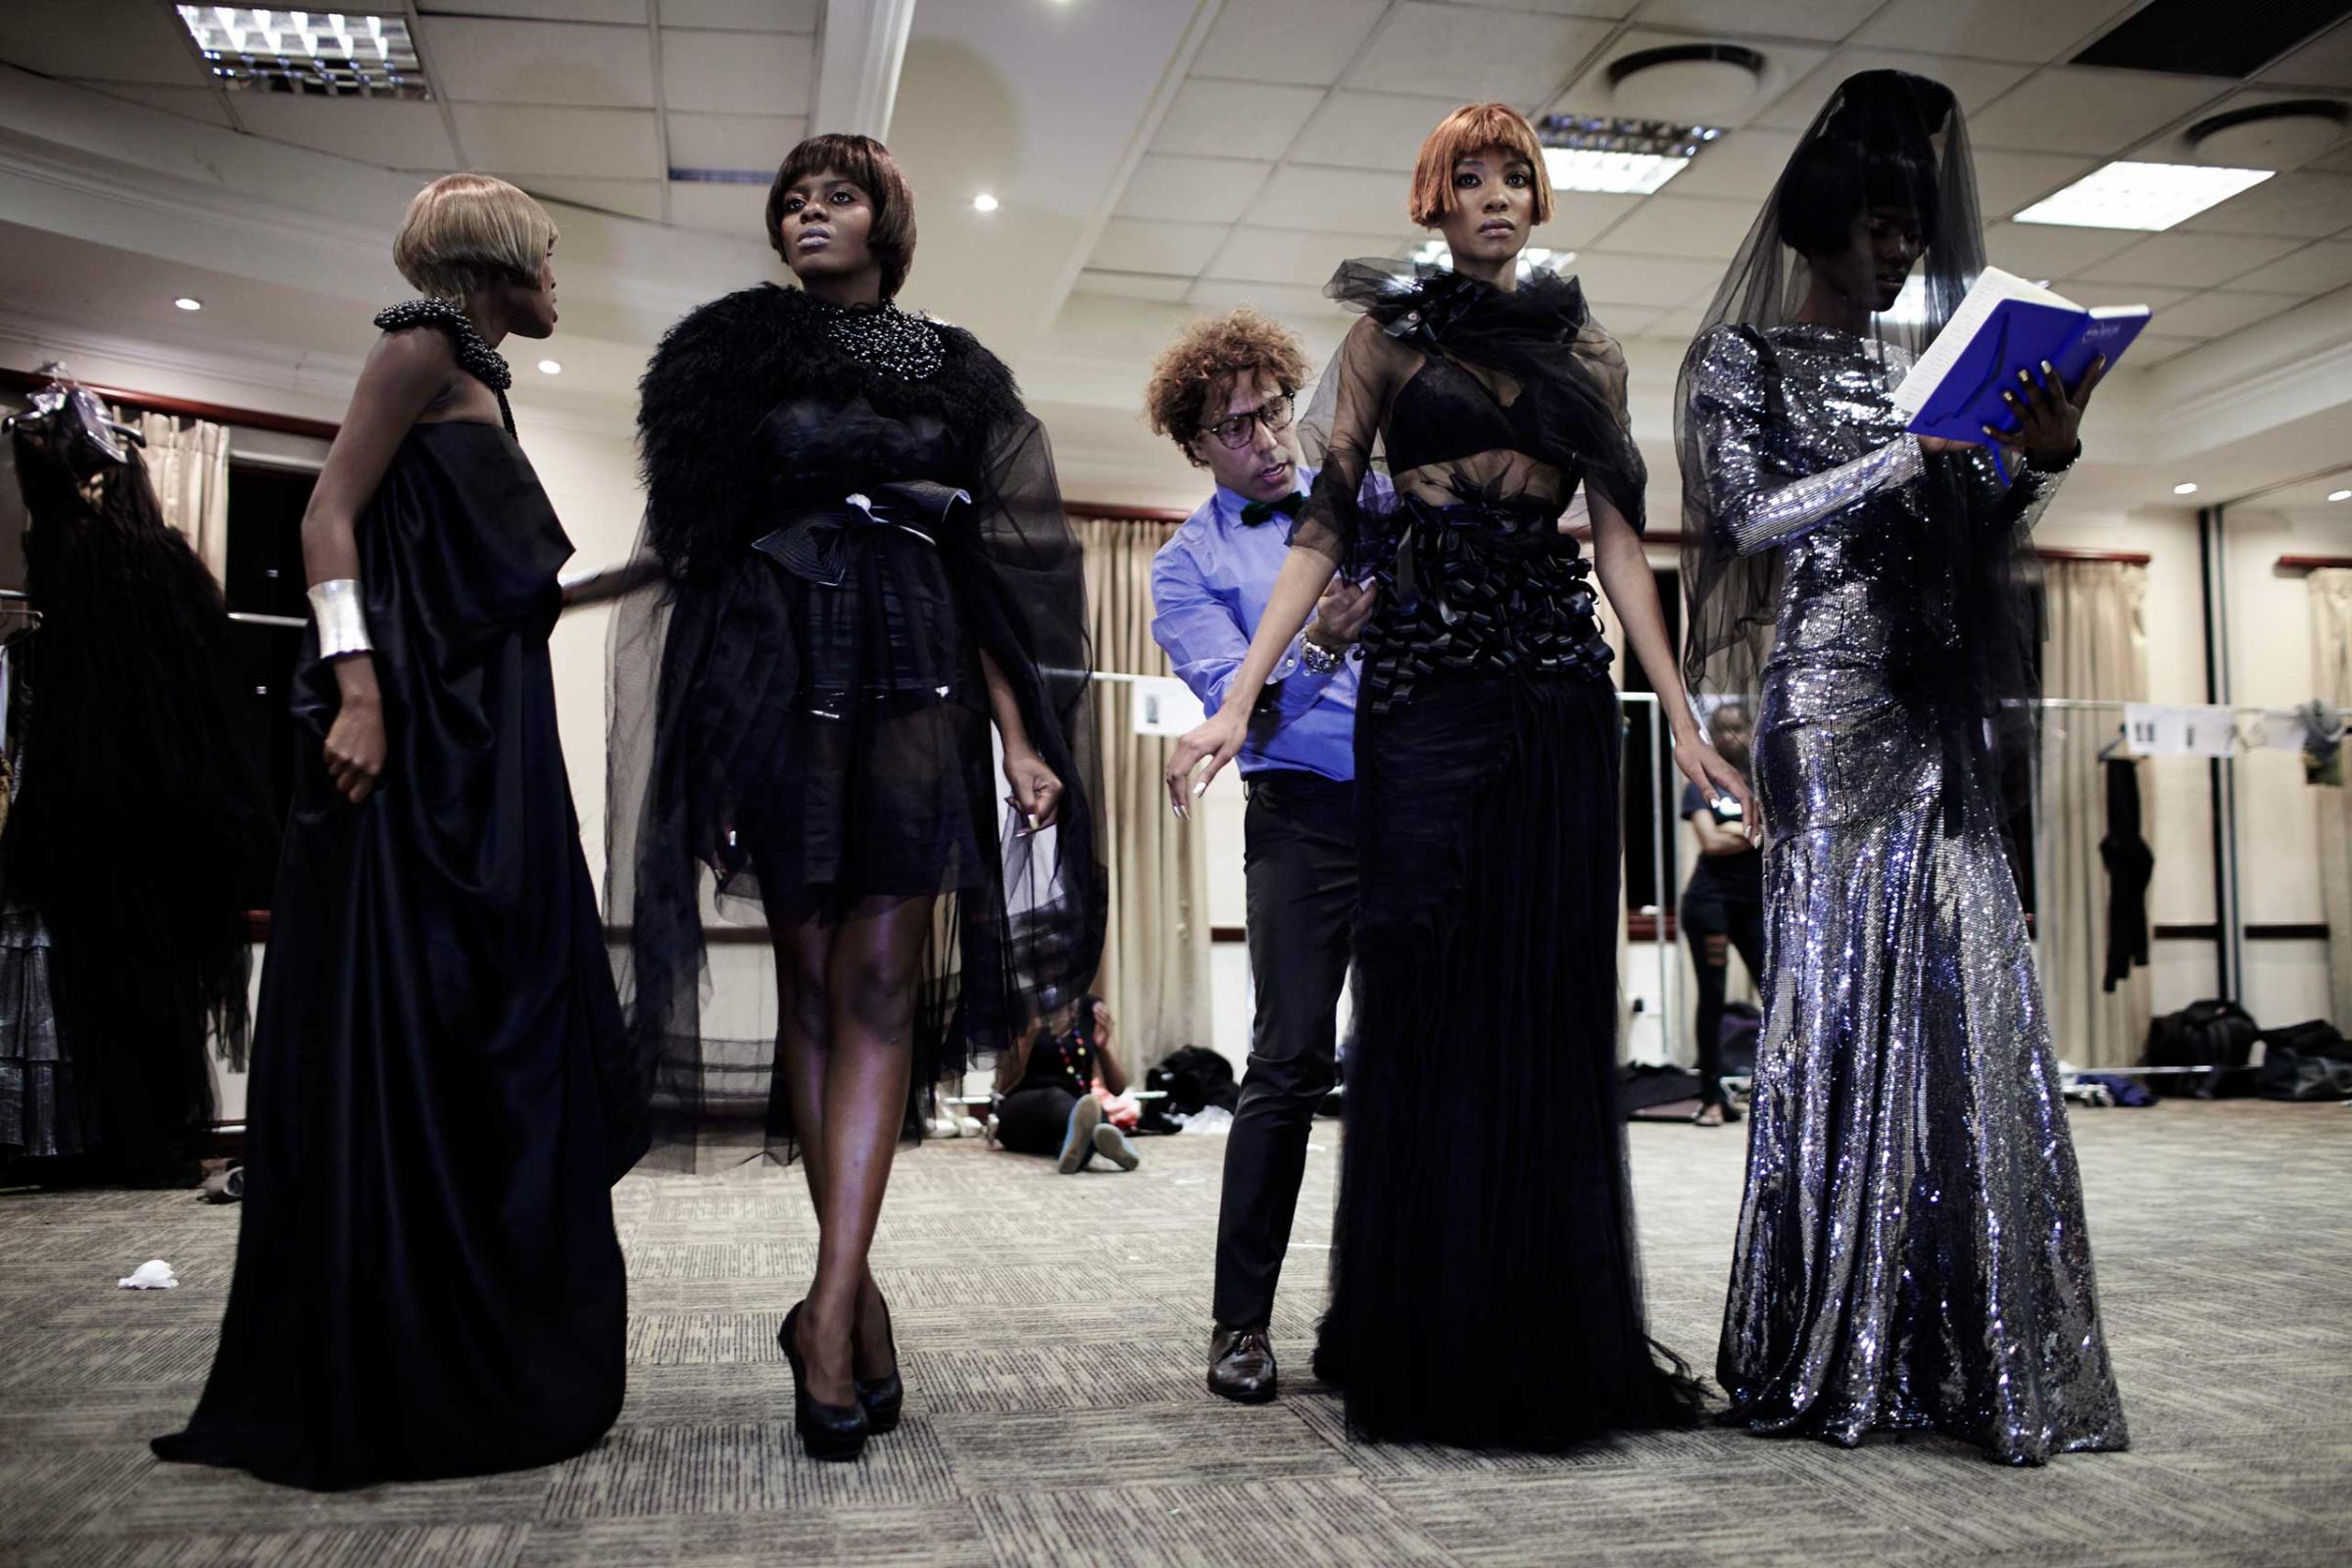 Egyptian designer Soucha prepares his models backstage before his fashion show at Color in the Desert Fashion week on Sept. 1, 2012 in Gaborone, Botswana.